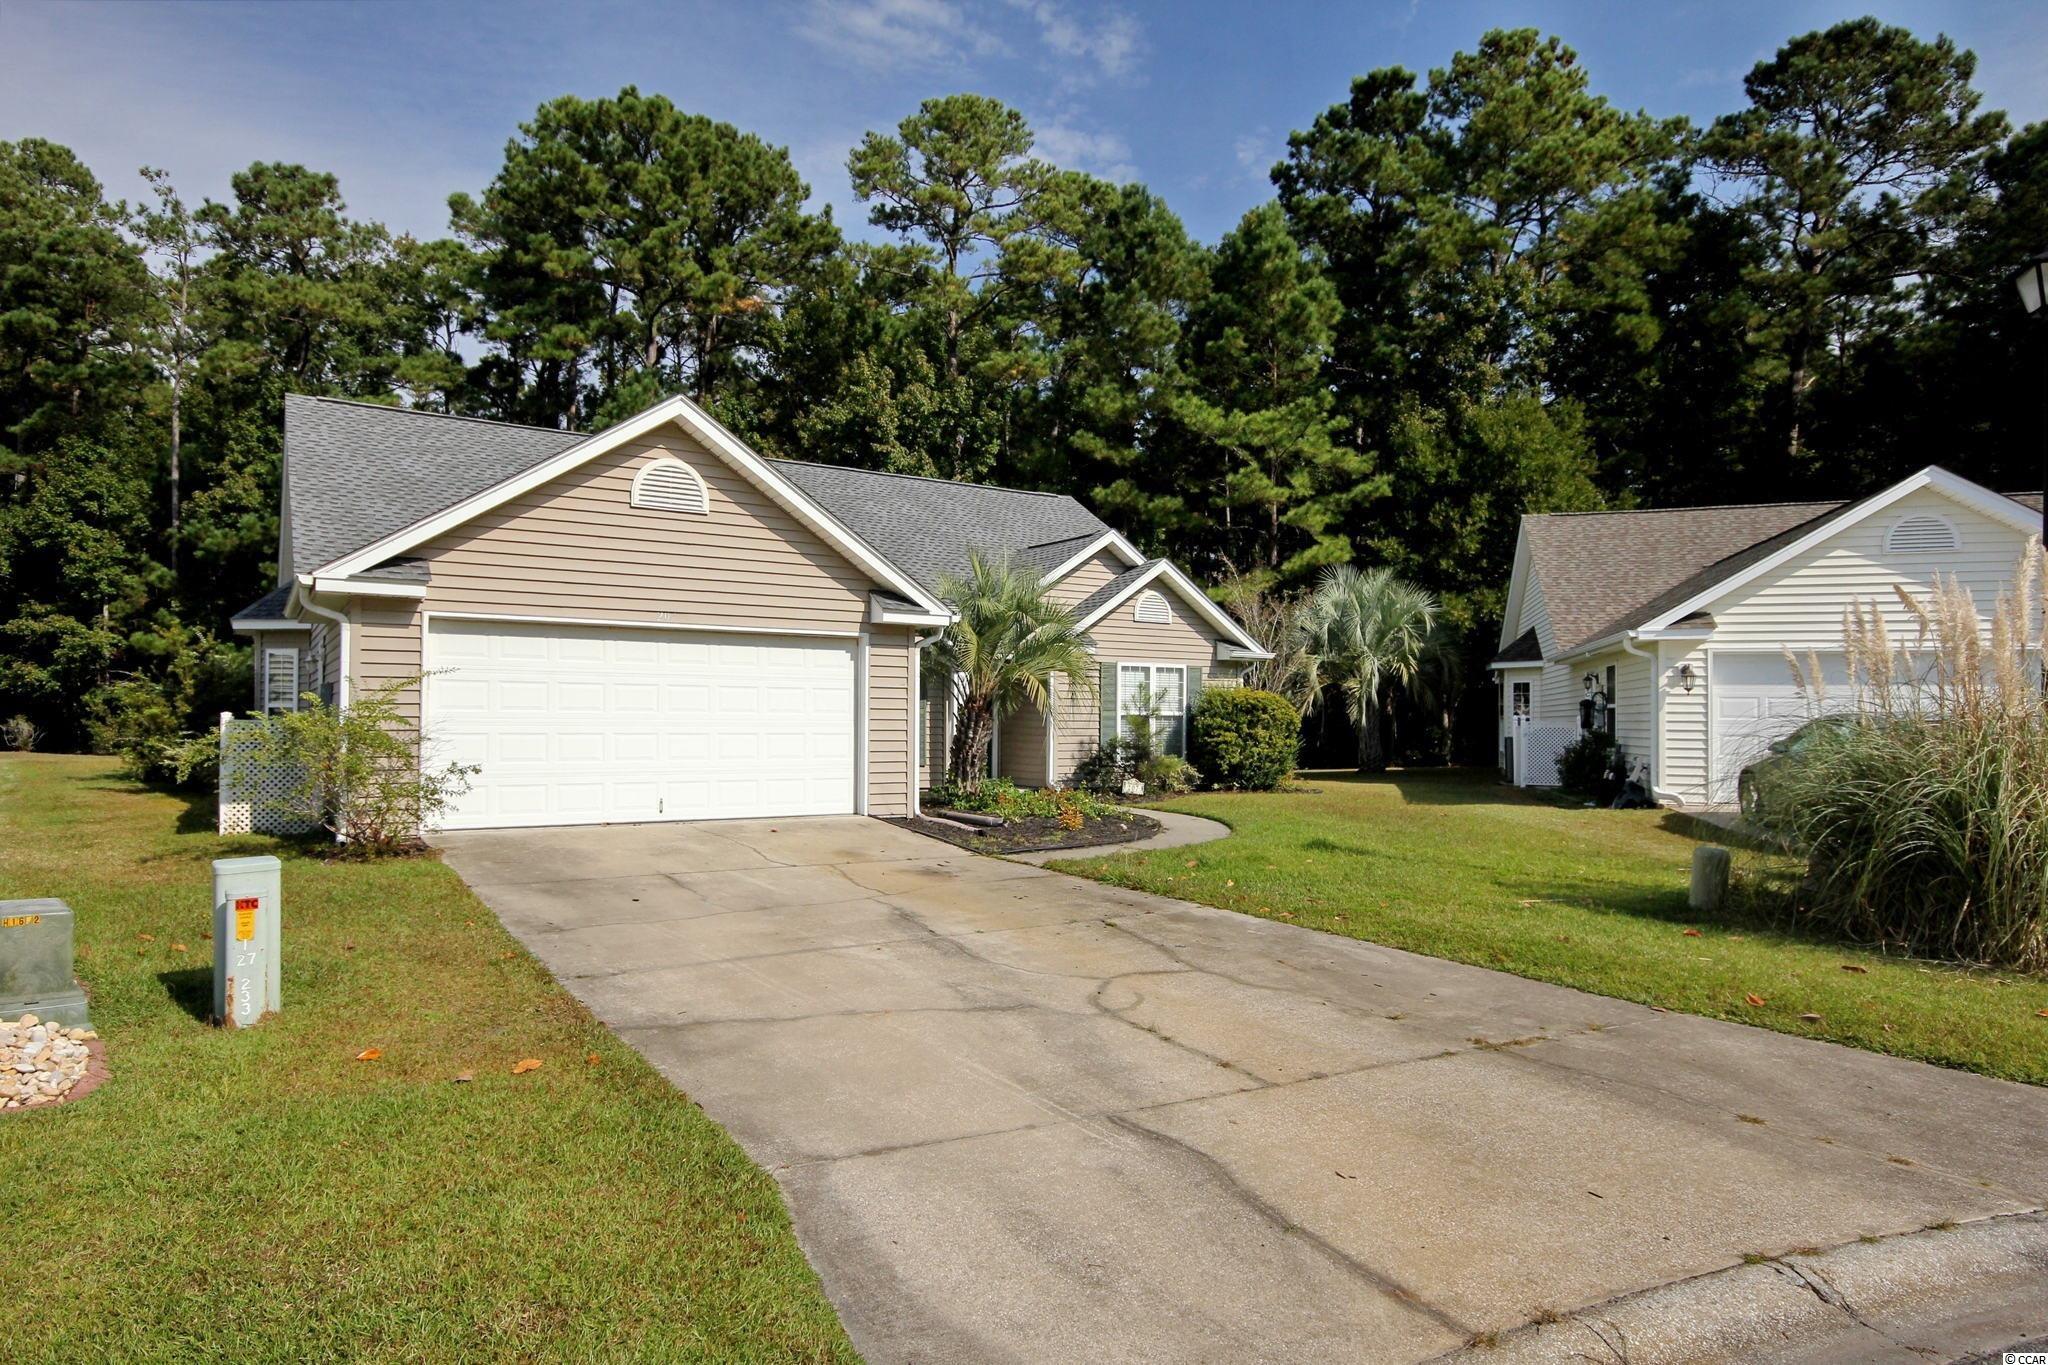 207 Covey Point Ct. Murrells Inlet, SC 29576